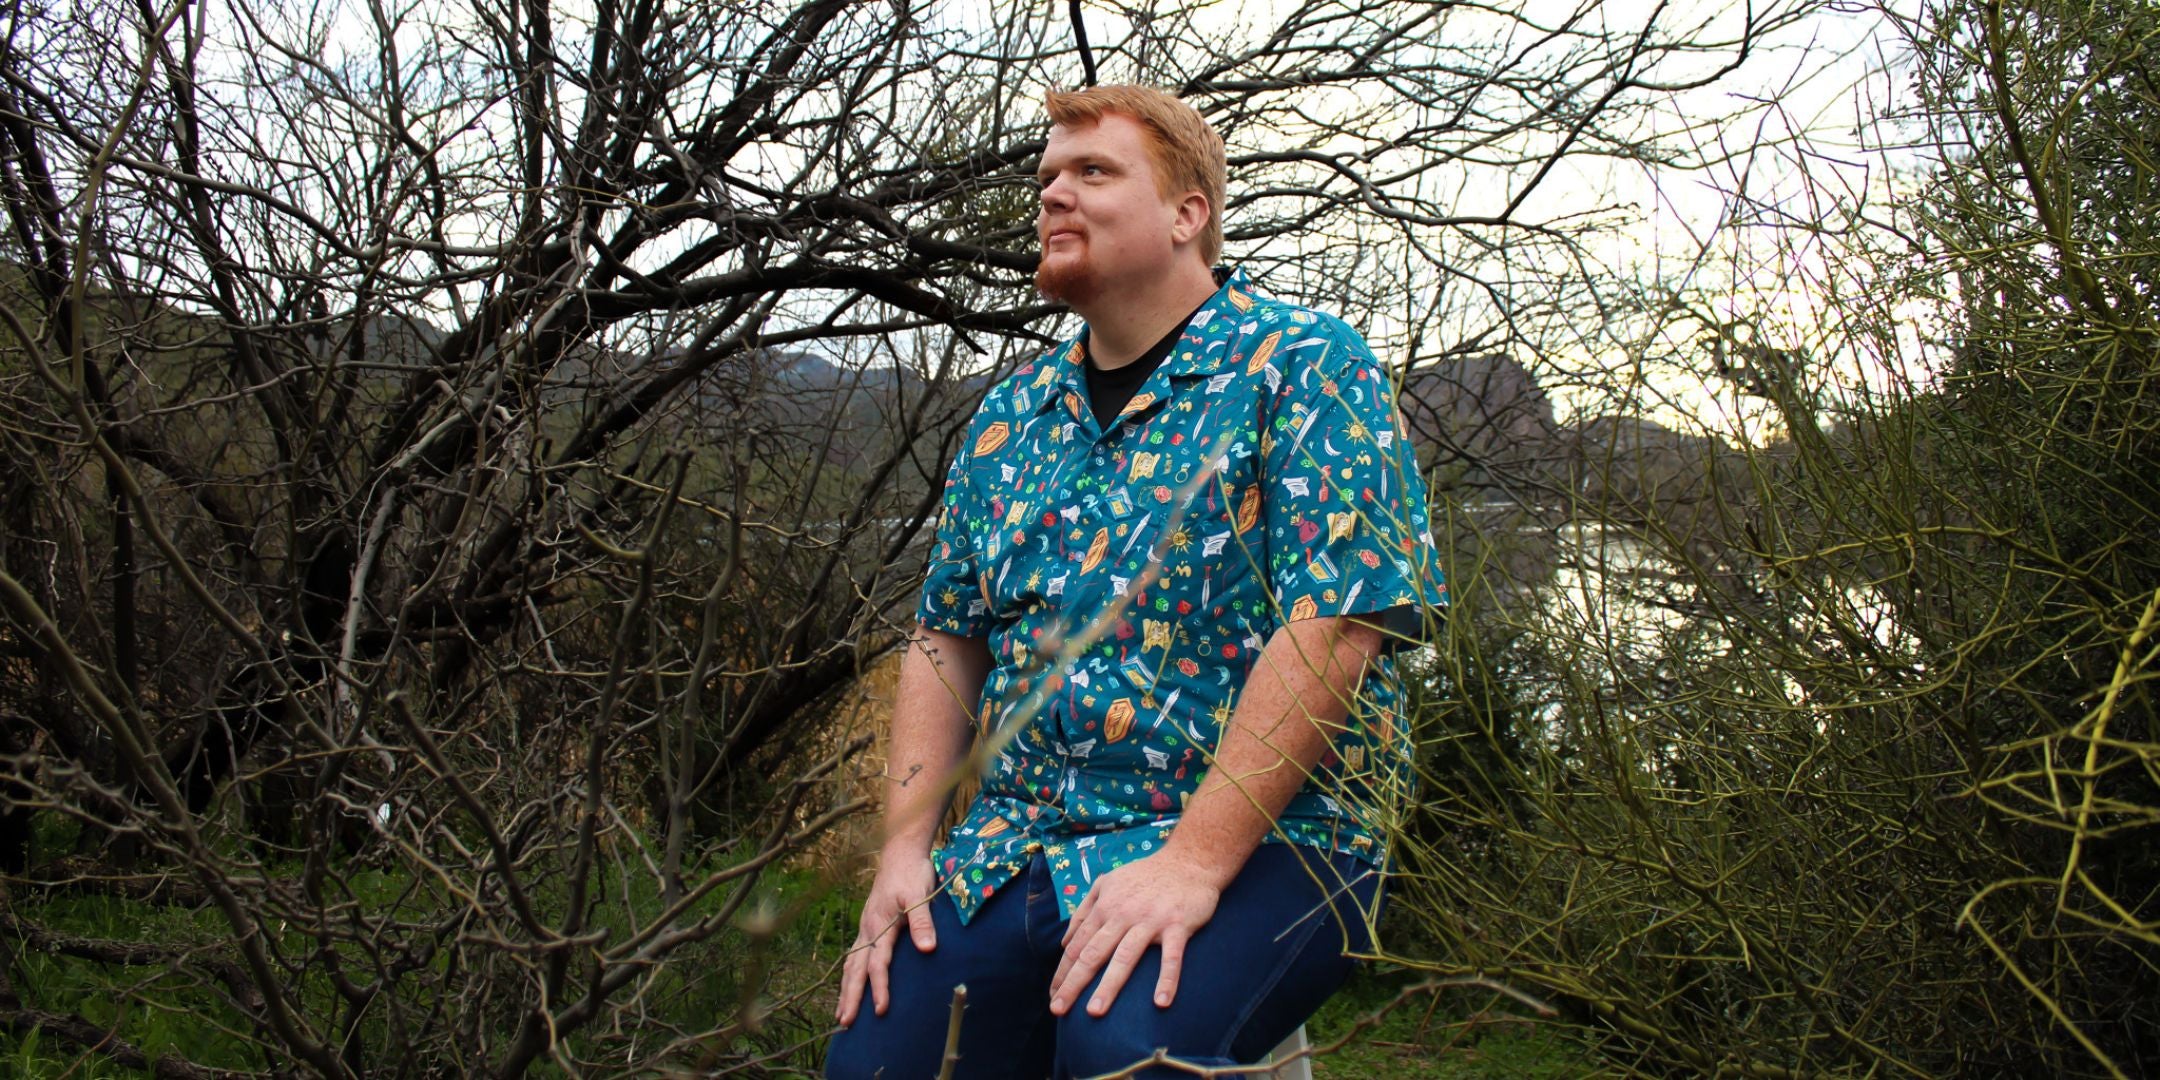 A red-headed man is standing in a lush forest wearing a RPG and dnd themed button-up adventure shirt. The shirt features dragons, swords, and other fantasy elements, perfect for any geeky outfit or D&D game night.